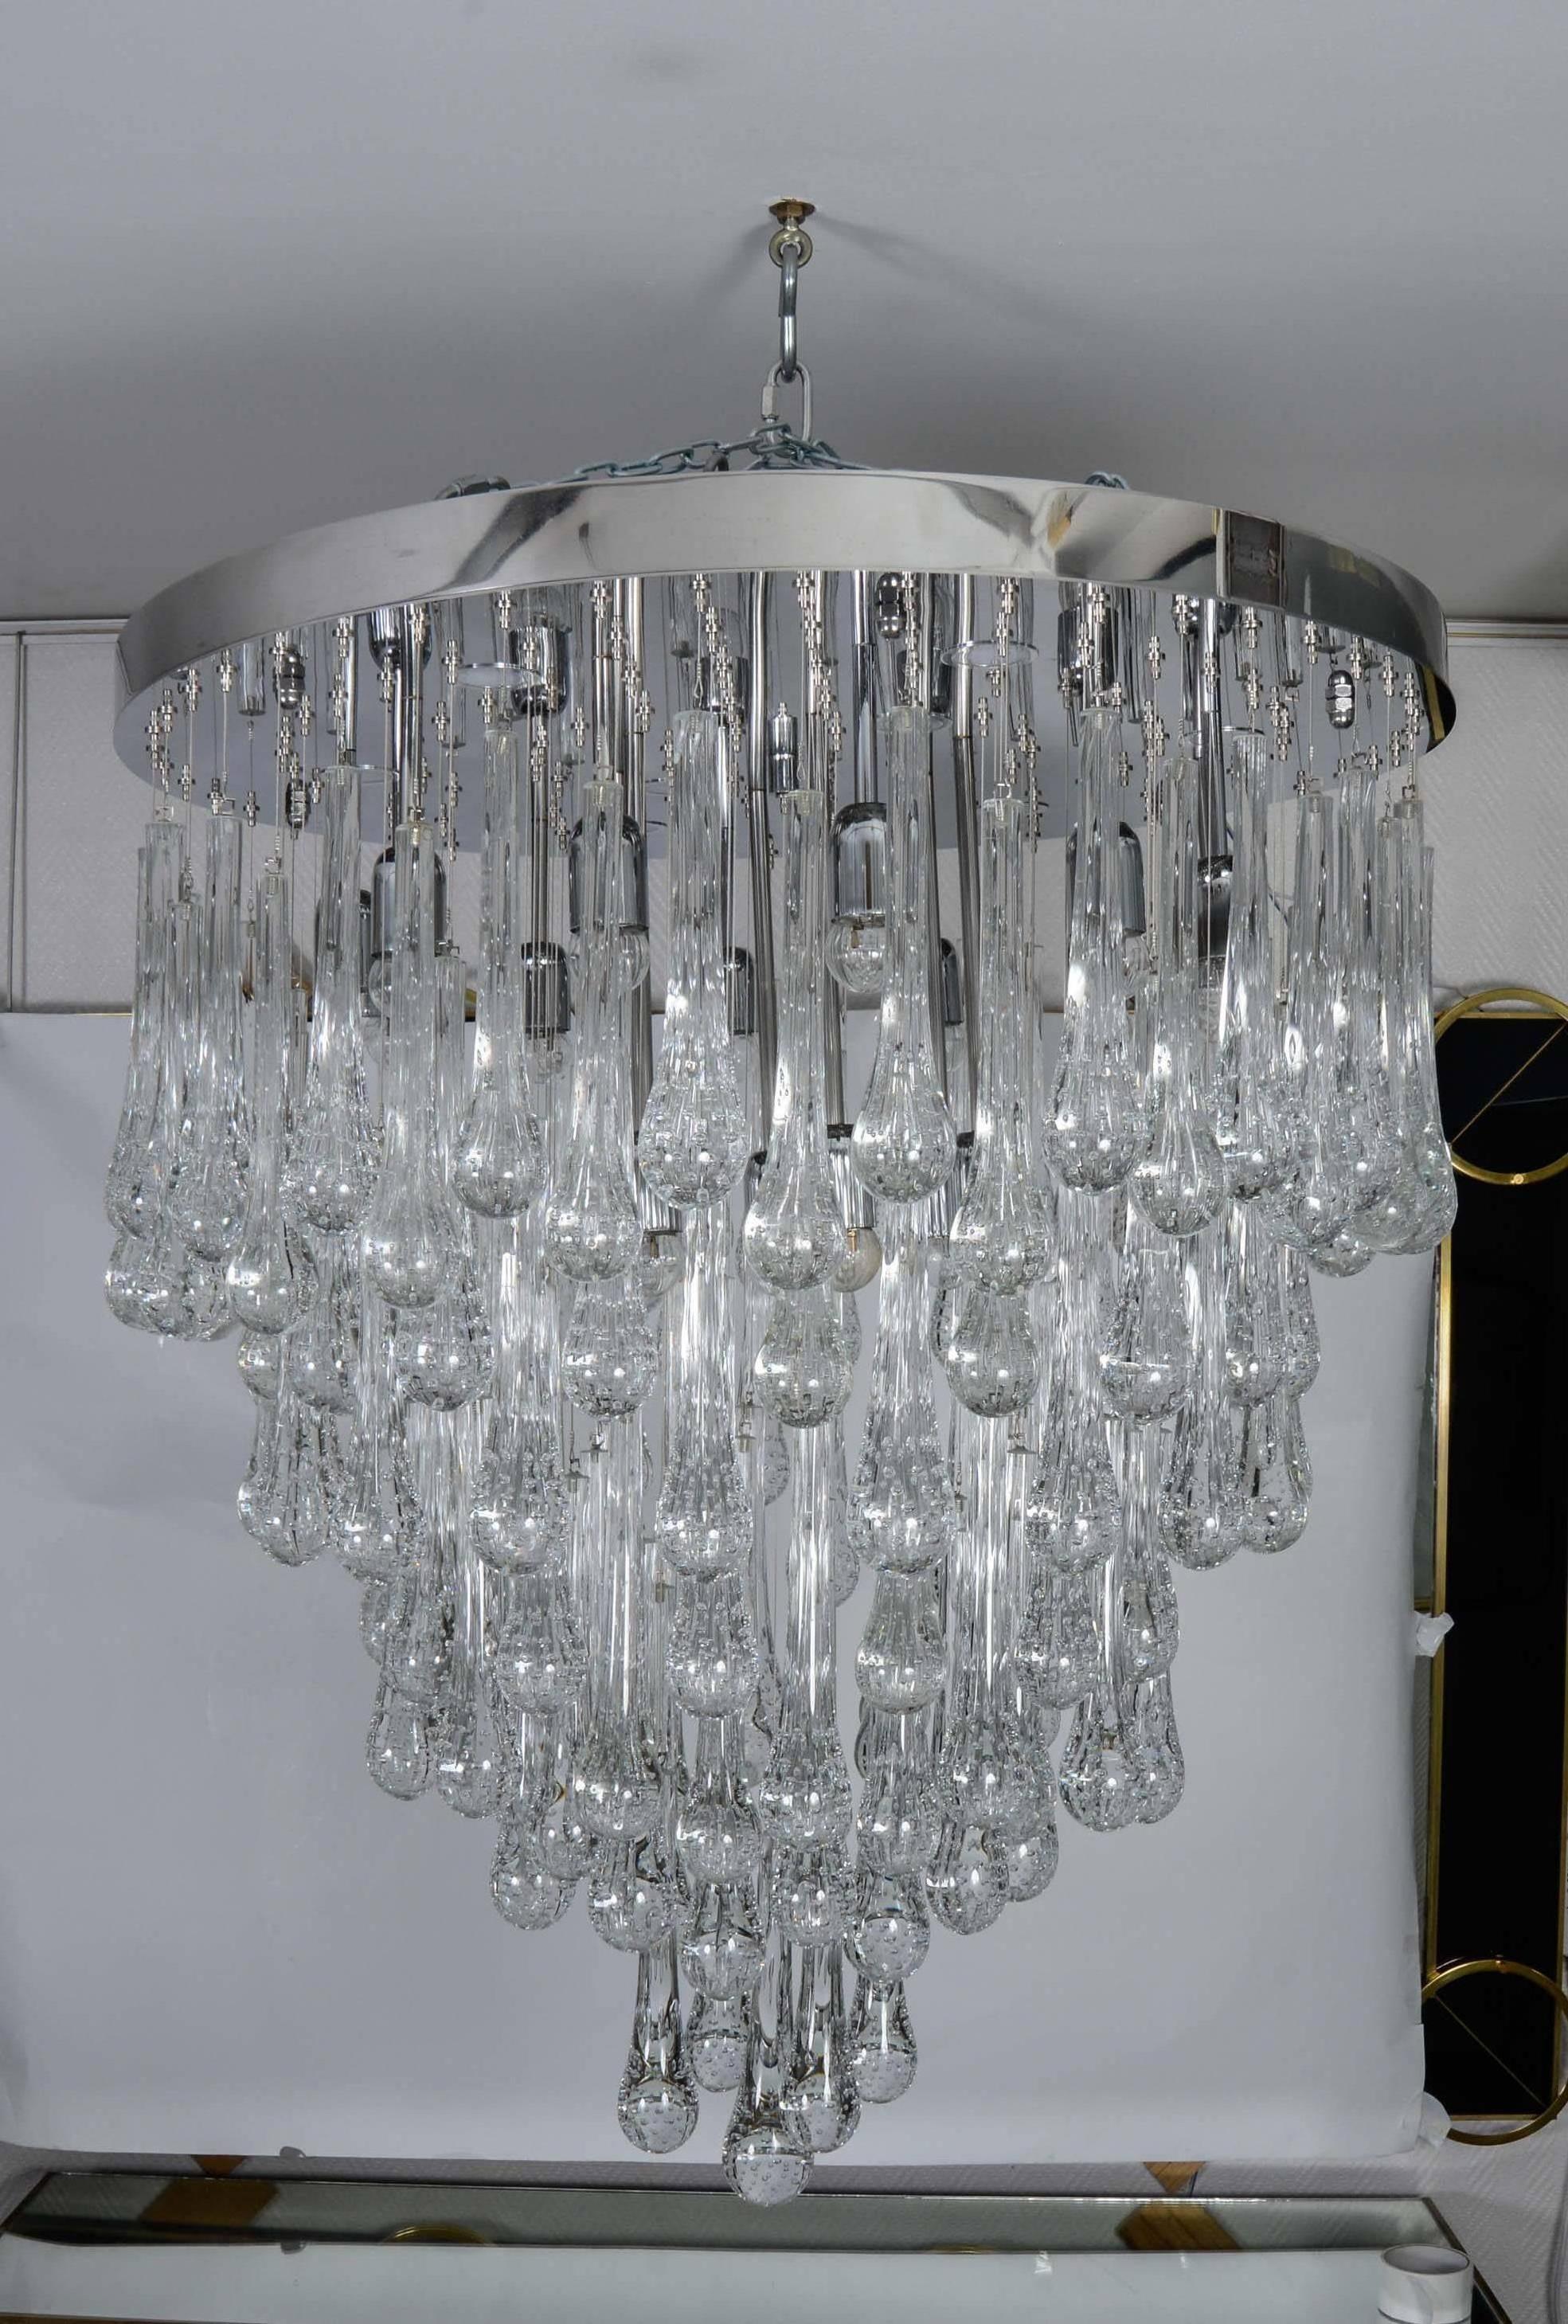 Murano glass chandelier with led bulbs and device for adjusting glass color.